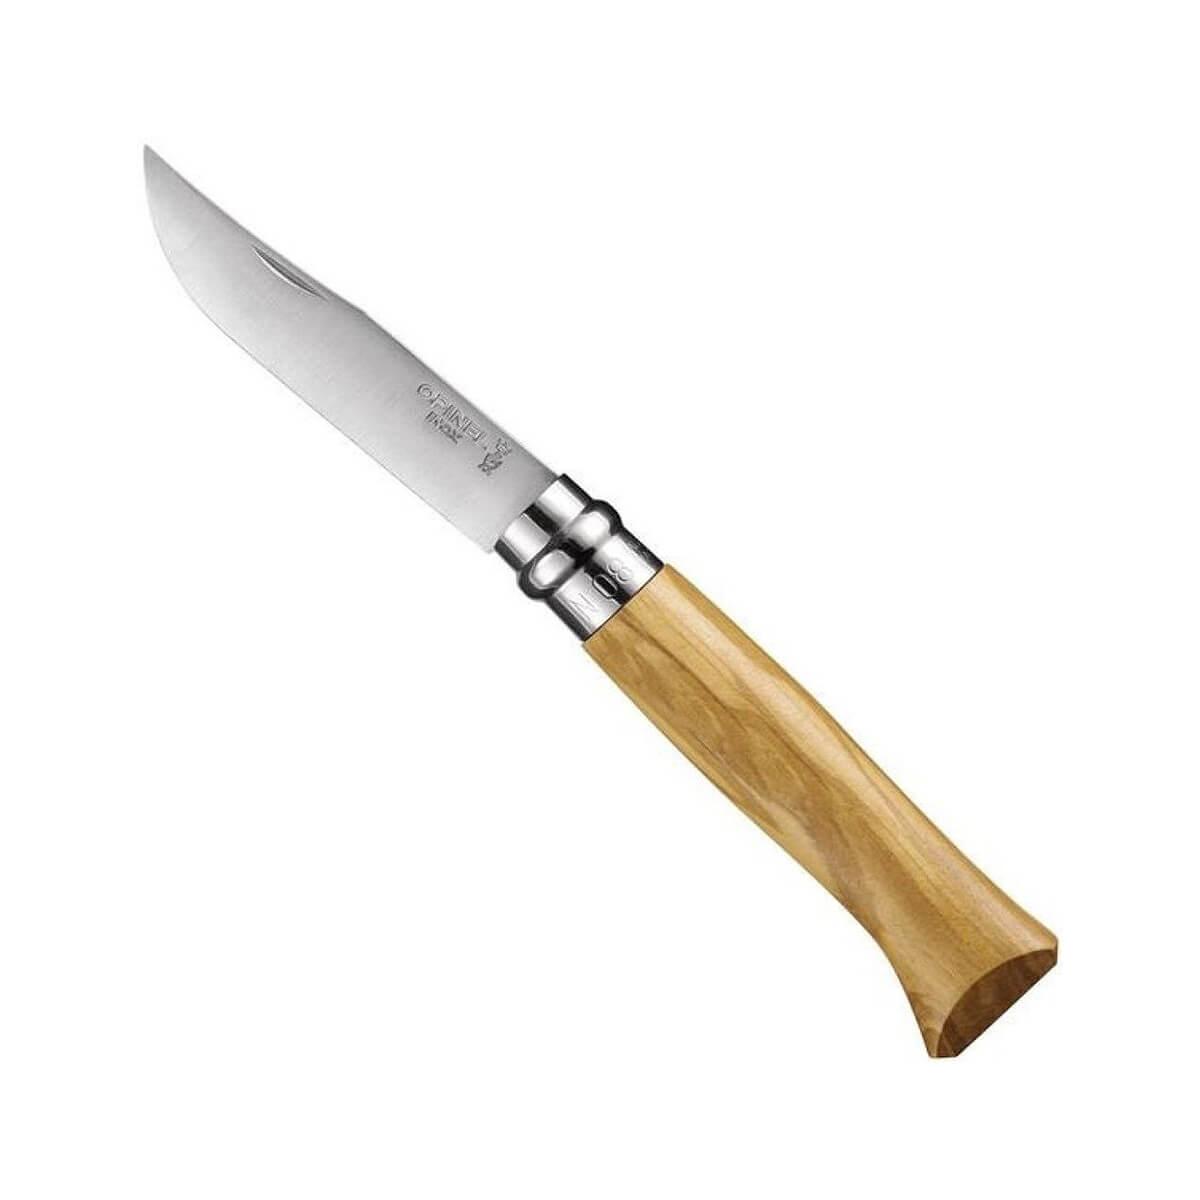  No.08 Olivewood Stainless Steel Pocket Knife